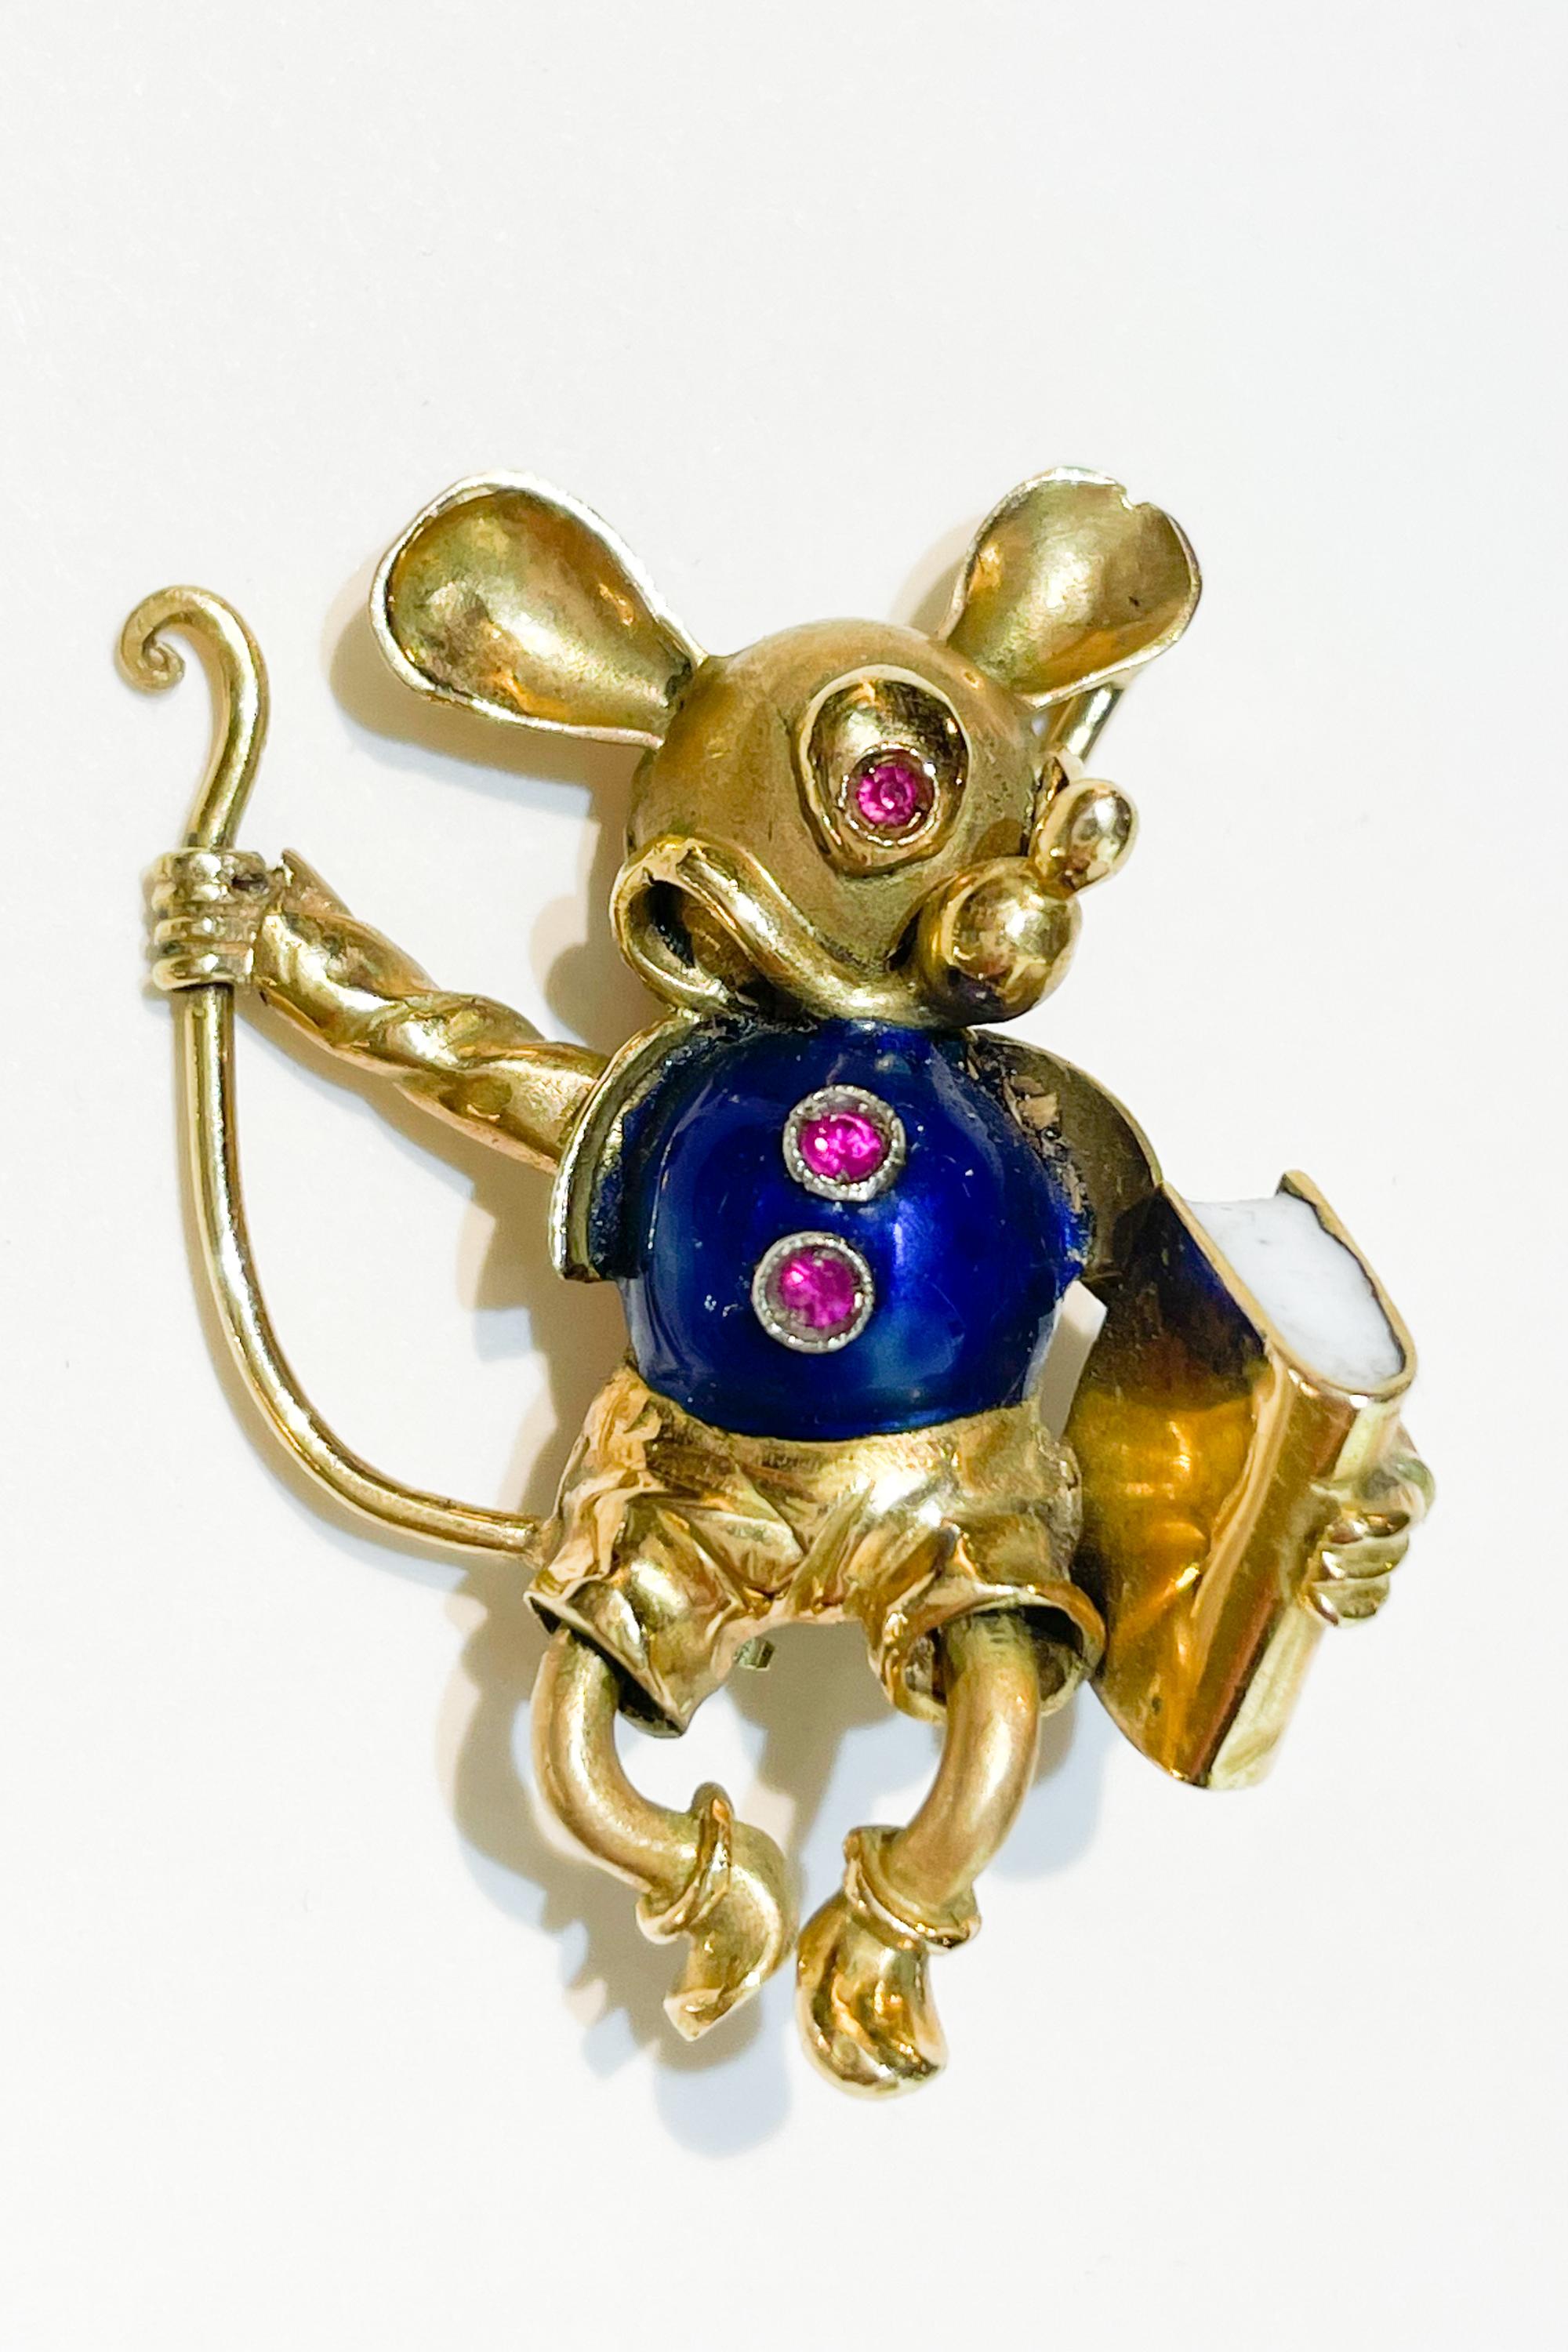 Mickey or Micky Mouse Brooch in gold and Enamels.
Mid 20th century.
Italian hallmarks: 750 , 18 ct gold.
Eyes made with red precious stones.
Fully functional closure.
High quality , detailed work.
Weight: 7gr
Size: 35mm x 27mm
Mickey Mouse is